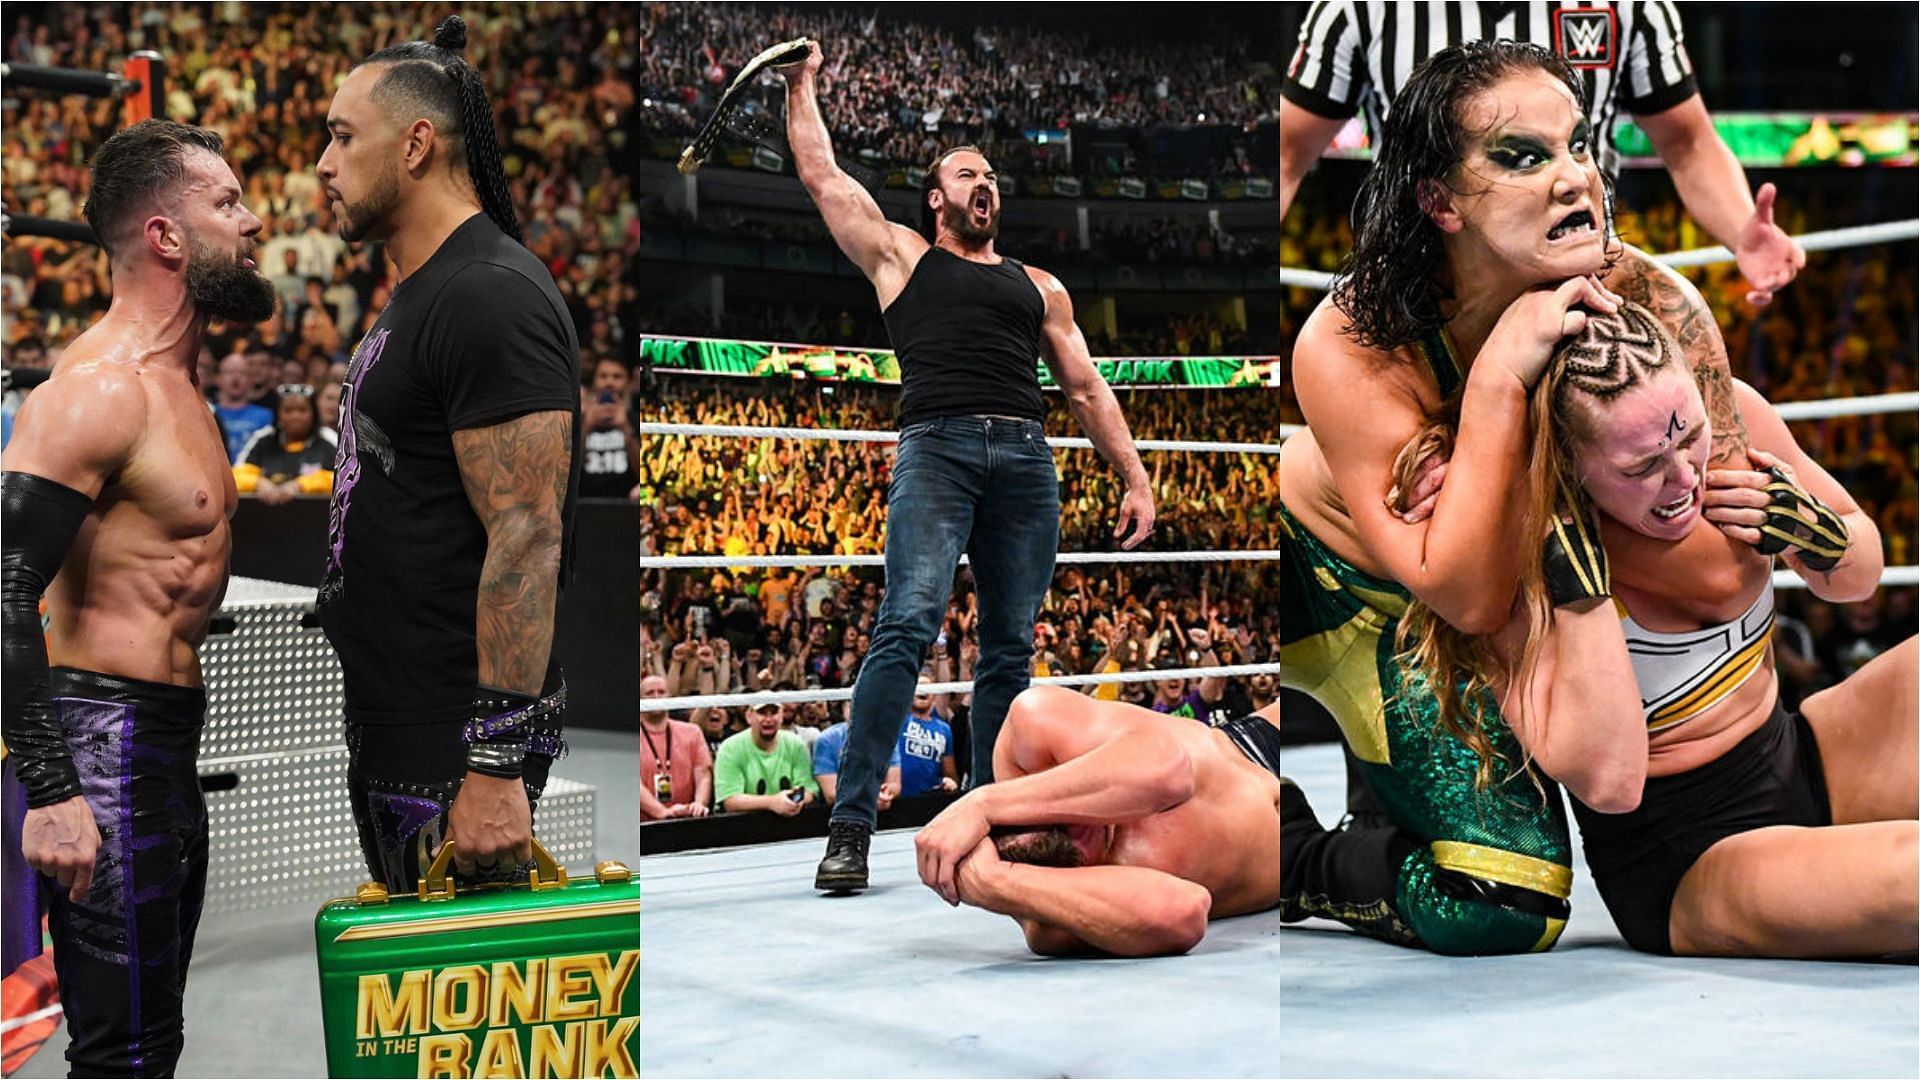 The events of Money In The Bank could lead to some epic drama on WWE RAW